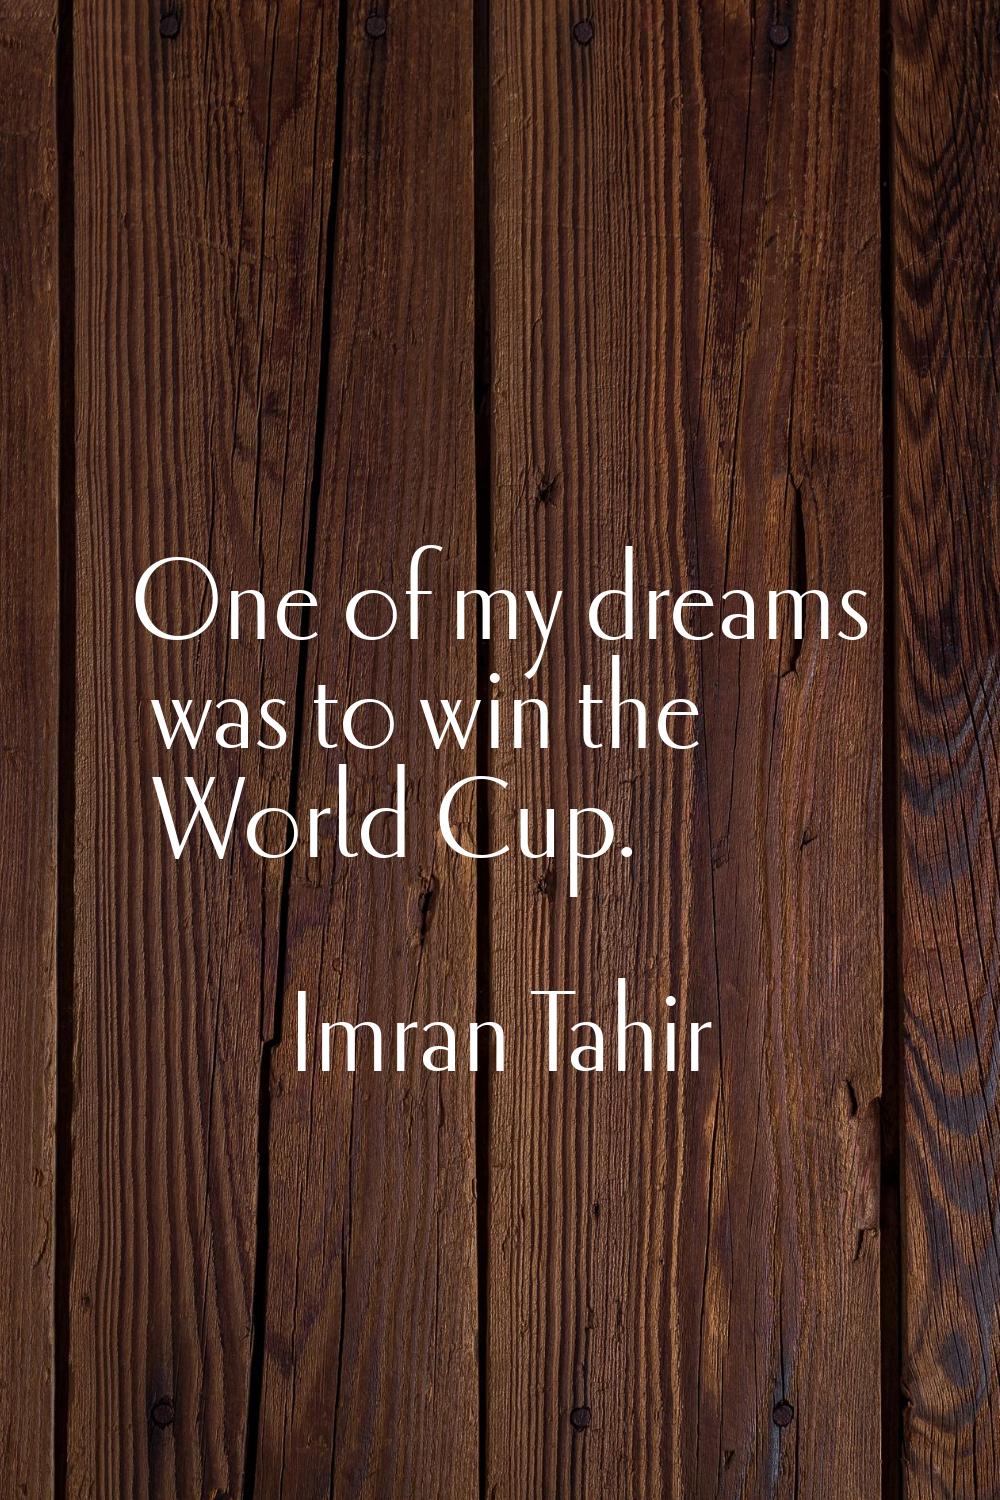 One of my dreams was to win the World Cup.